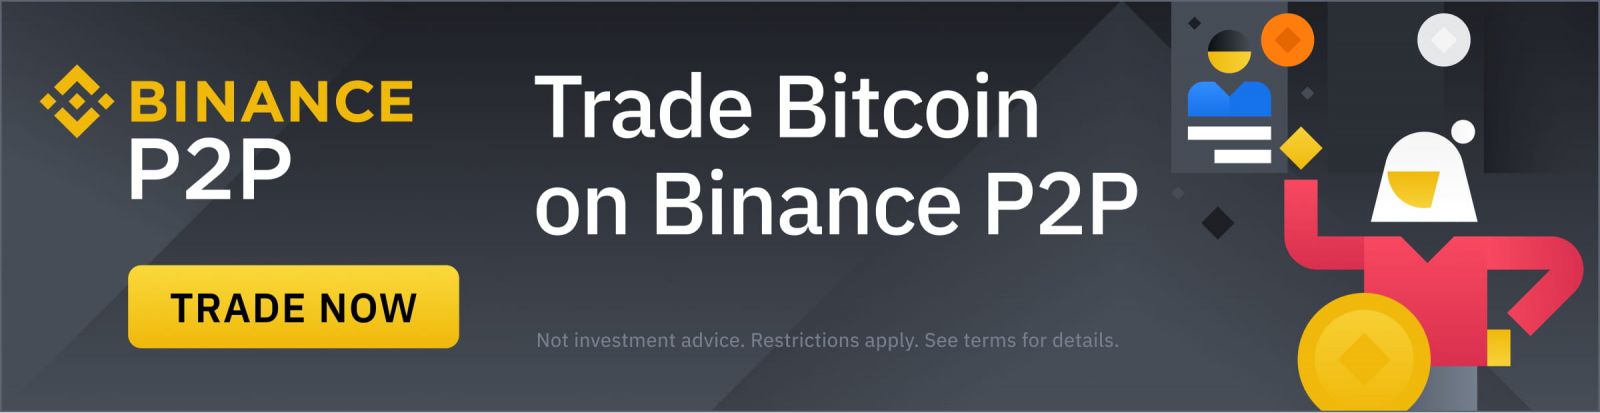 How many Ways to Trade Crypto on Binance? What's the Difference